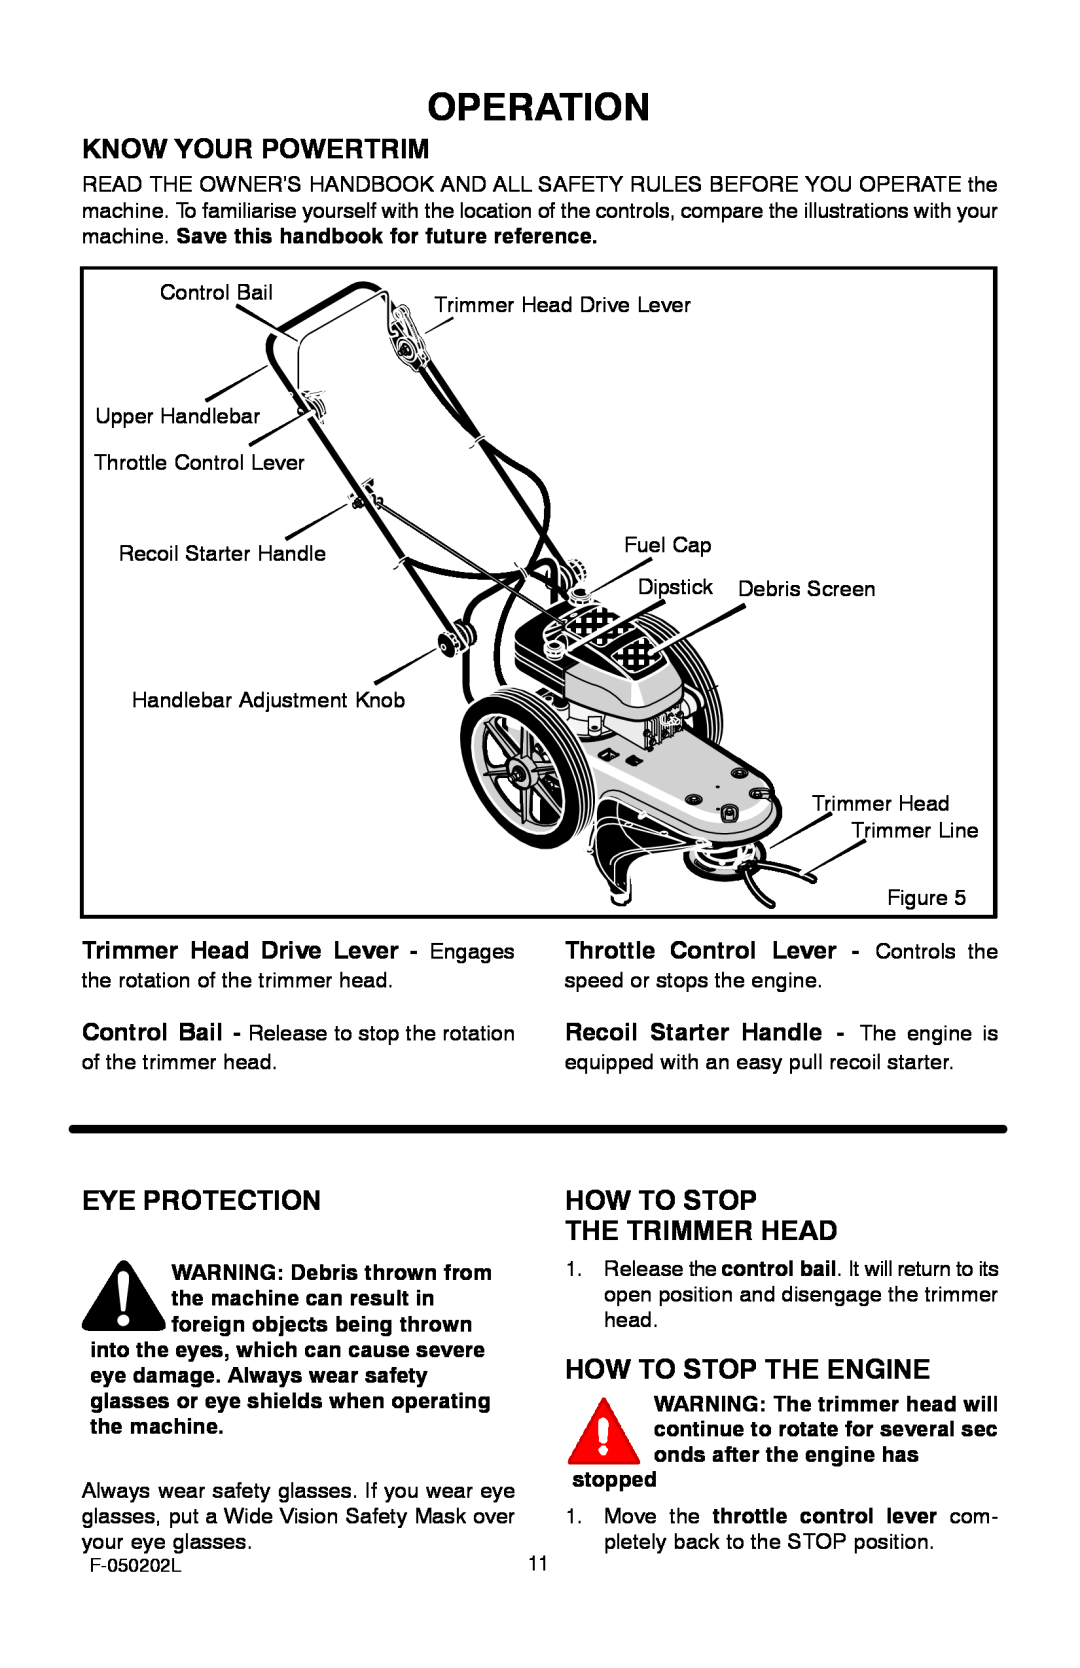 Hayter Mowers 401C001001 manual Operation, Know Your Powertrim, Eye Protection, How To Stop The Trimmer Head 